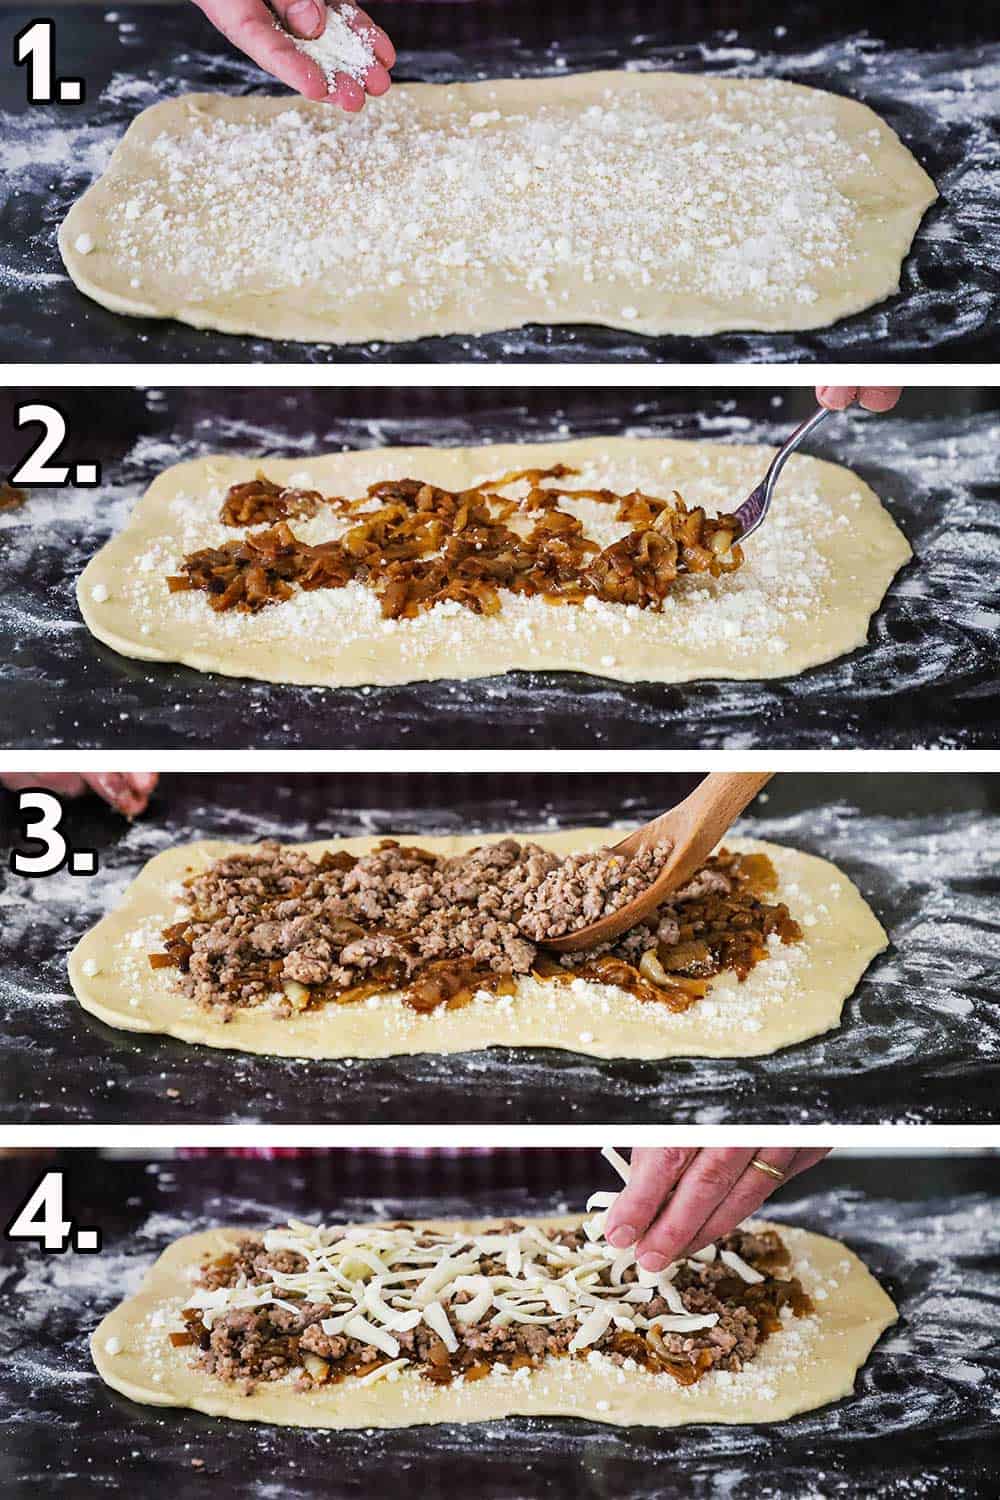 A person sprinkling grated Parmesan cheese on a rectangular piece of pizza dough, and then caramelized onions being added, then cooked sausage, and then shredded mozzarella cheese.